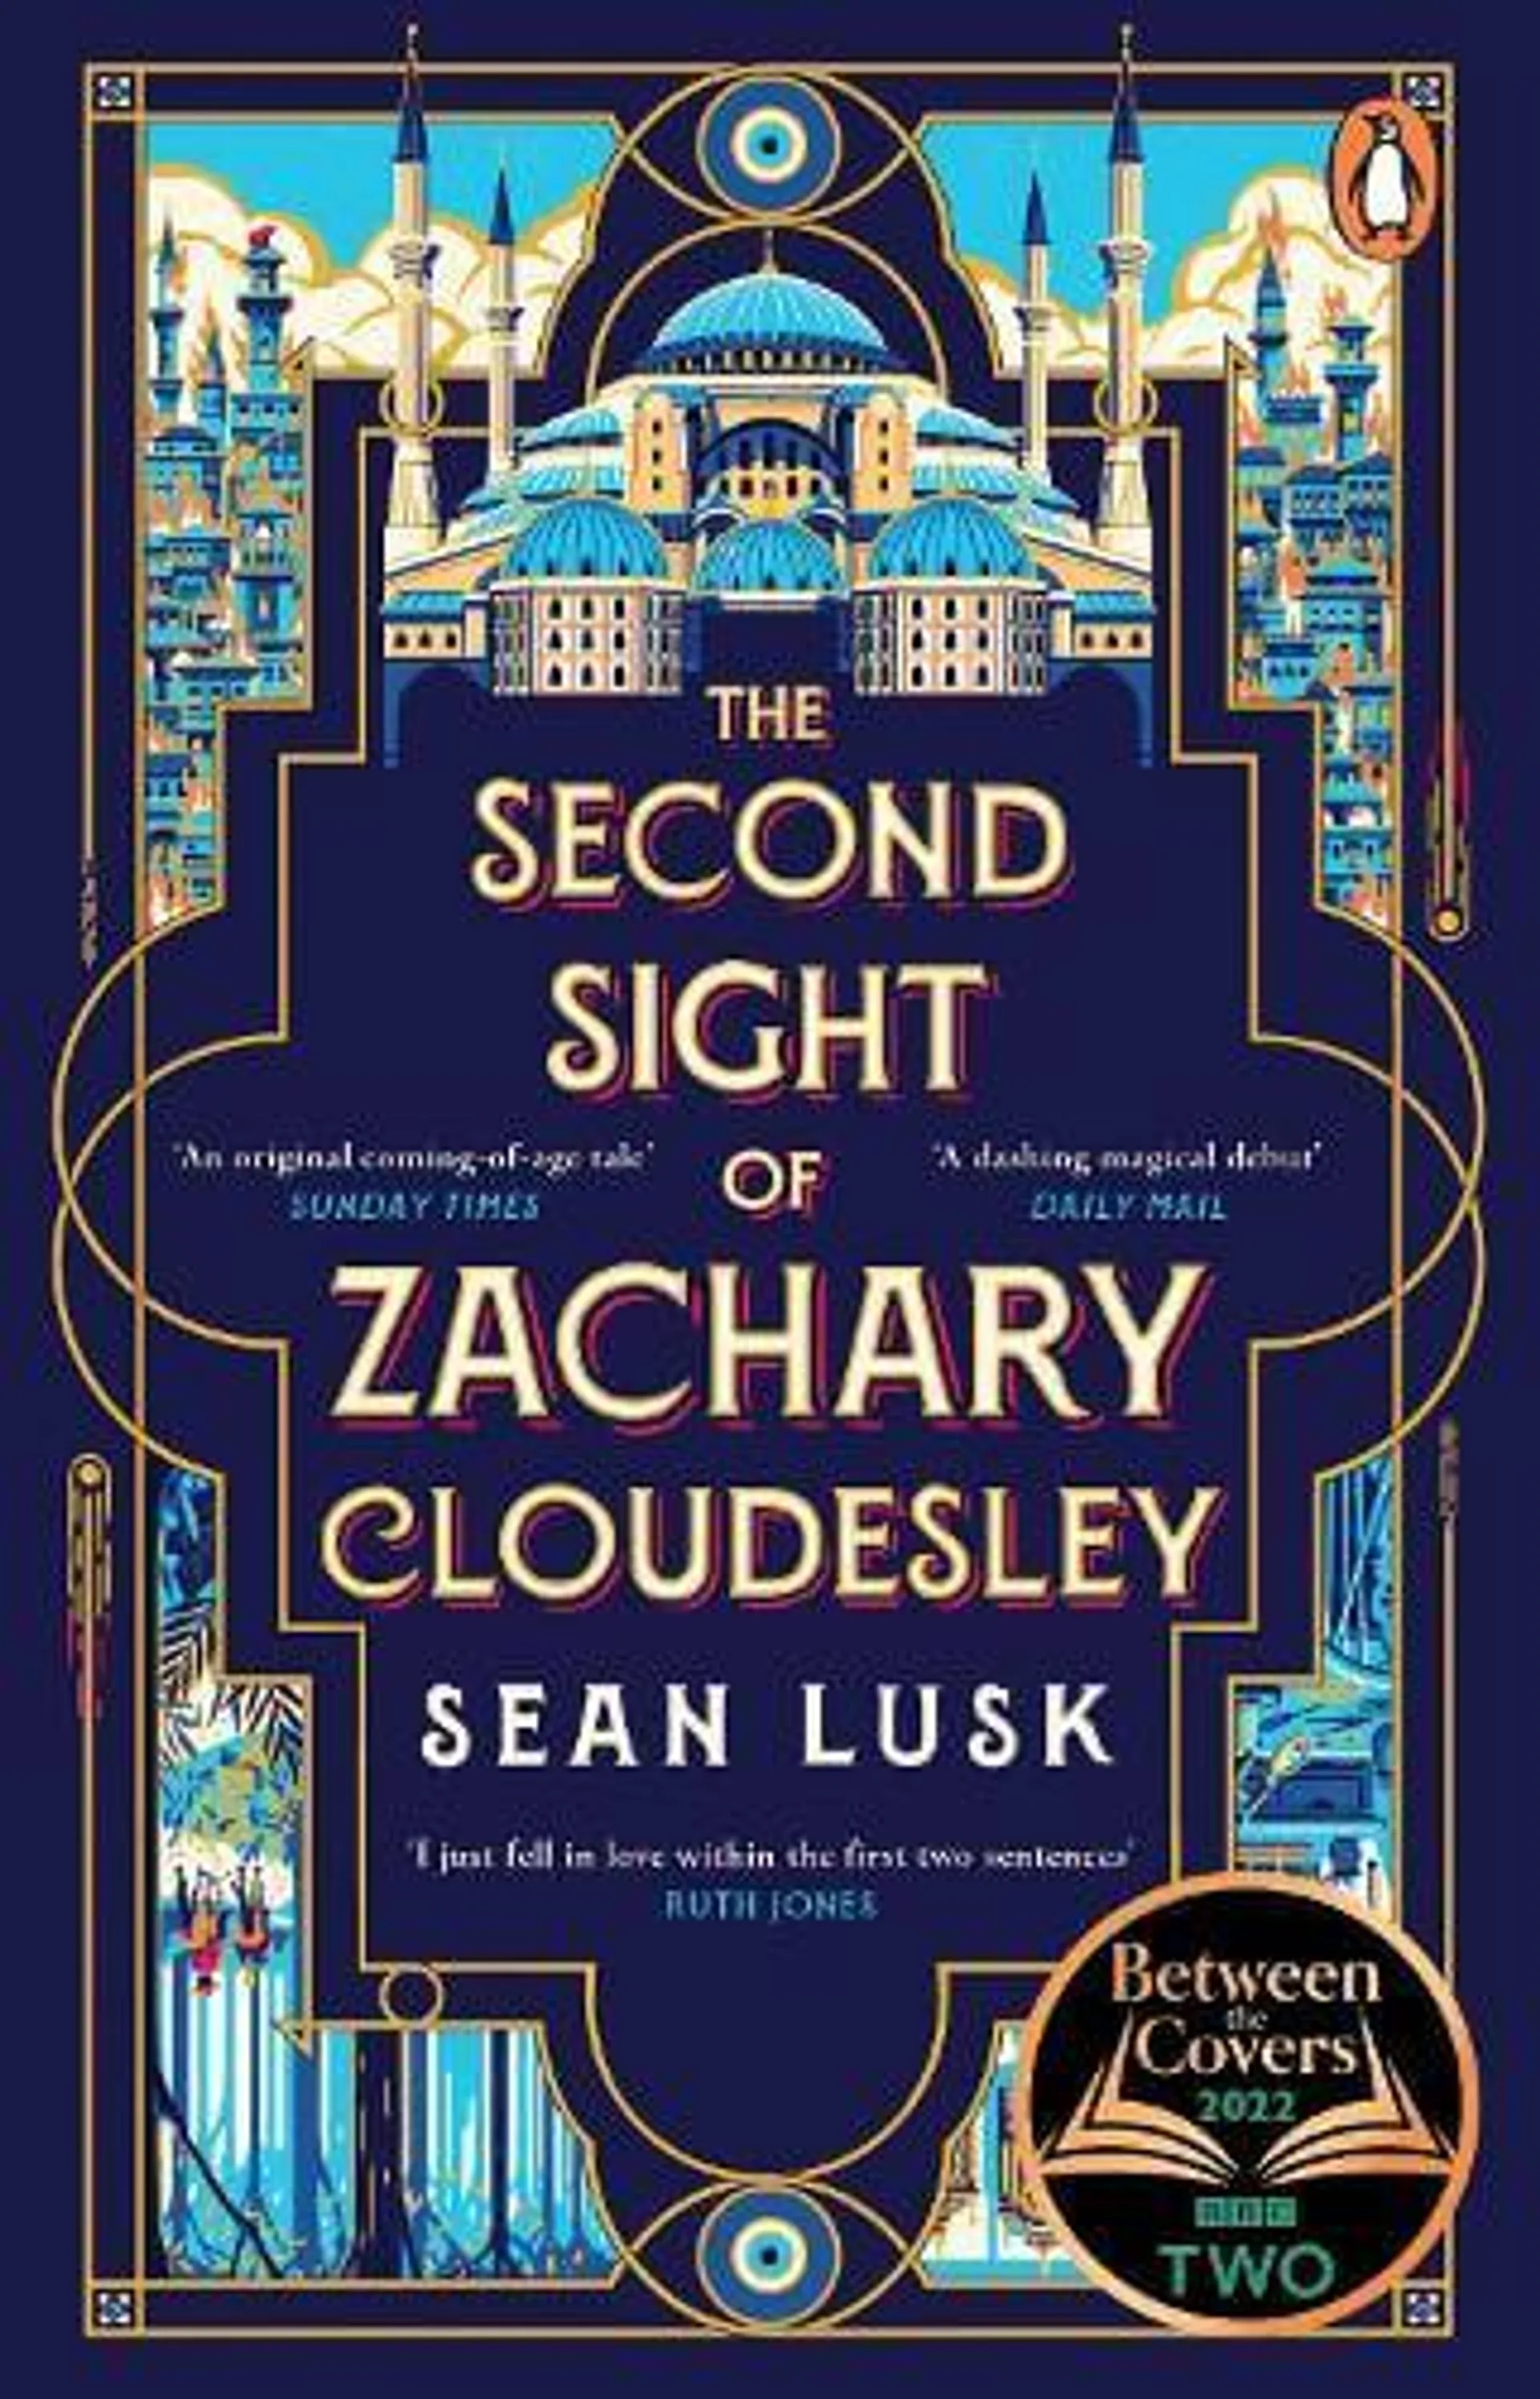 The Second Sight of Zachary Cloudesley (Paperback)